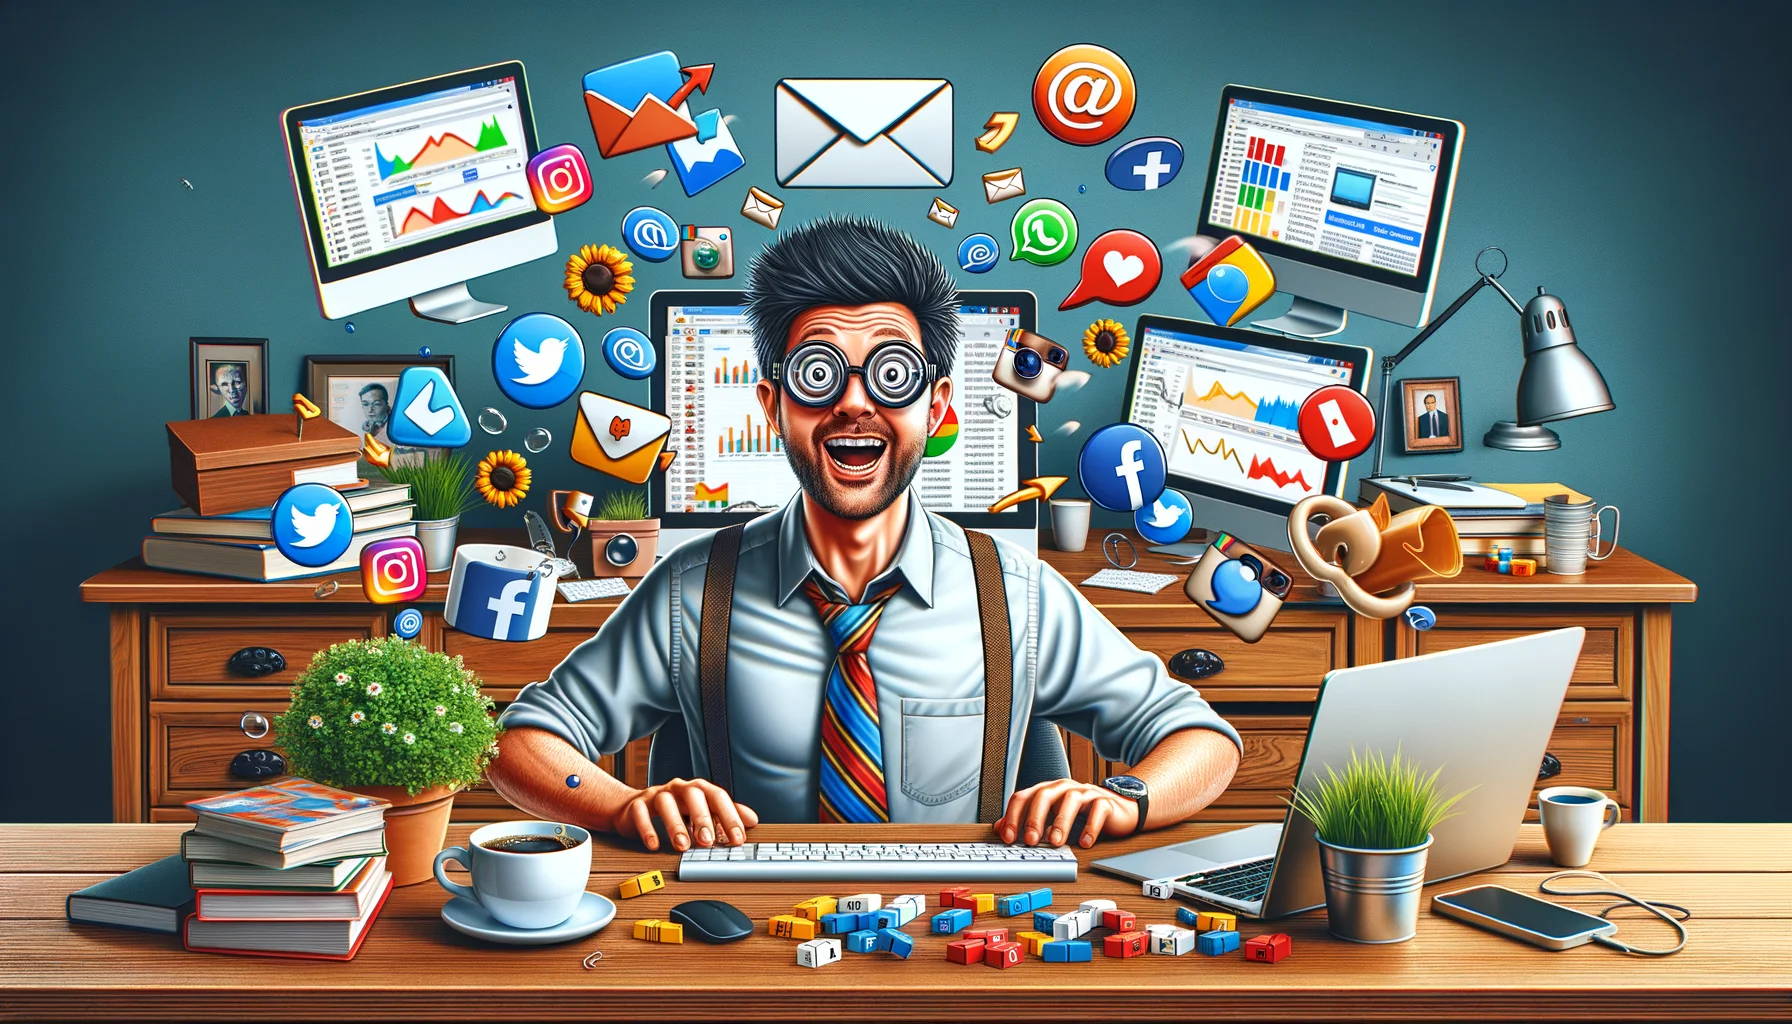 Create a humorous, realistic image centered around a fictional affiliate marketer character humorously trying to promote his online business. This character is named 'Mitch' and he is comically juggling internet icons like emails, social media symbols and browser logos. The setting is a cozy home office filled with fun items that characterize affiliate marketing, such as a desktop with multiple monitors, and scattered charts showing erratic sales graphs. Additionally, show a cup of overflowing coffee on his desk, symbolizing his high energy and constant work ethic.